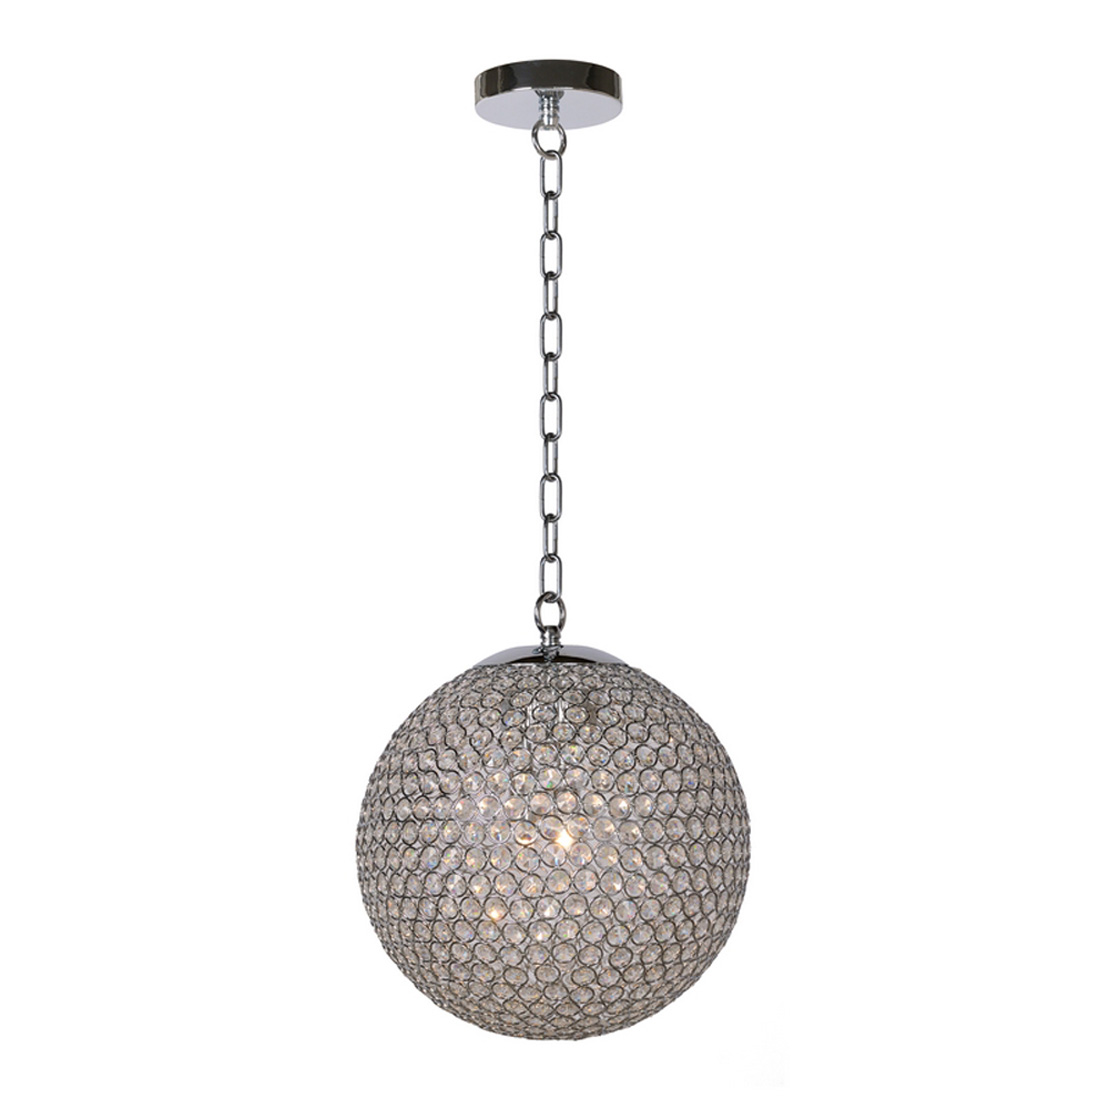 Lucide PERSIS - Pendant lamp - Chrome - G9 - 3 x 28W (incl.)